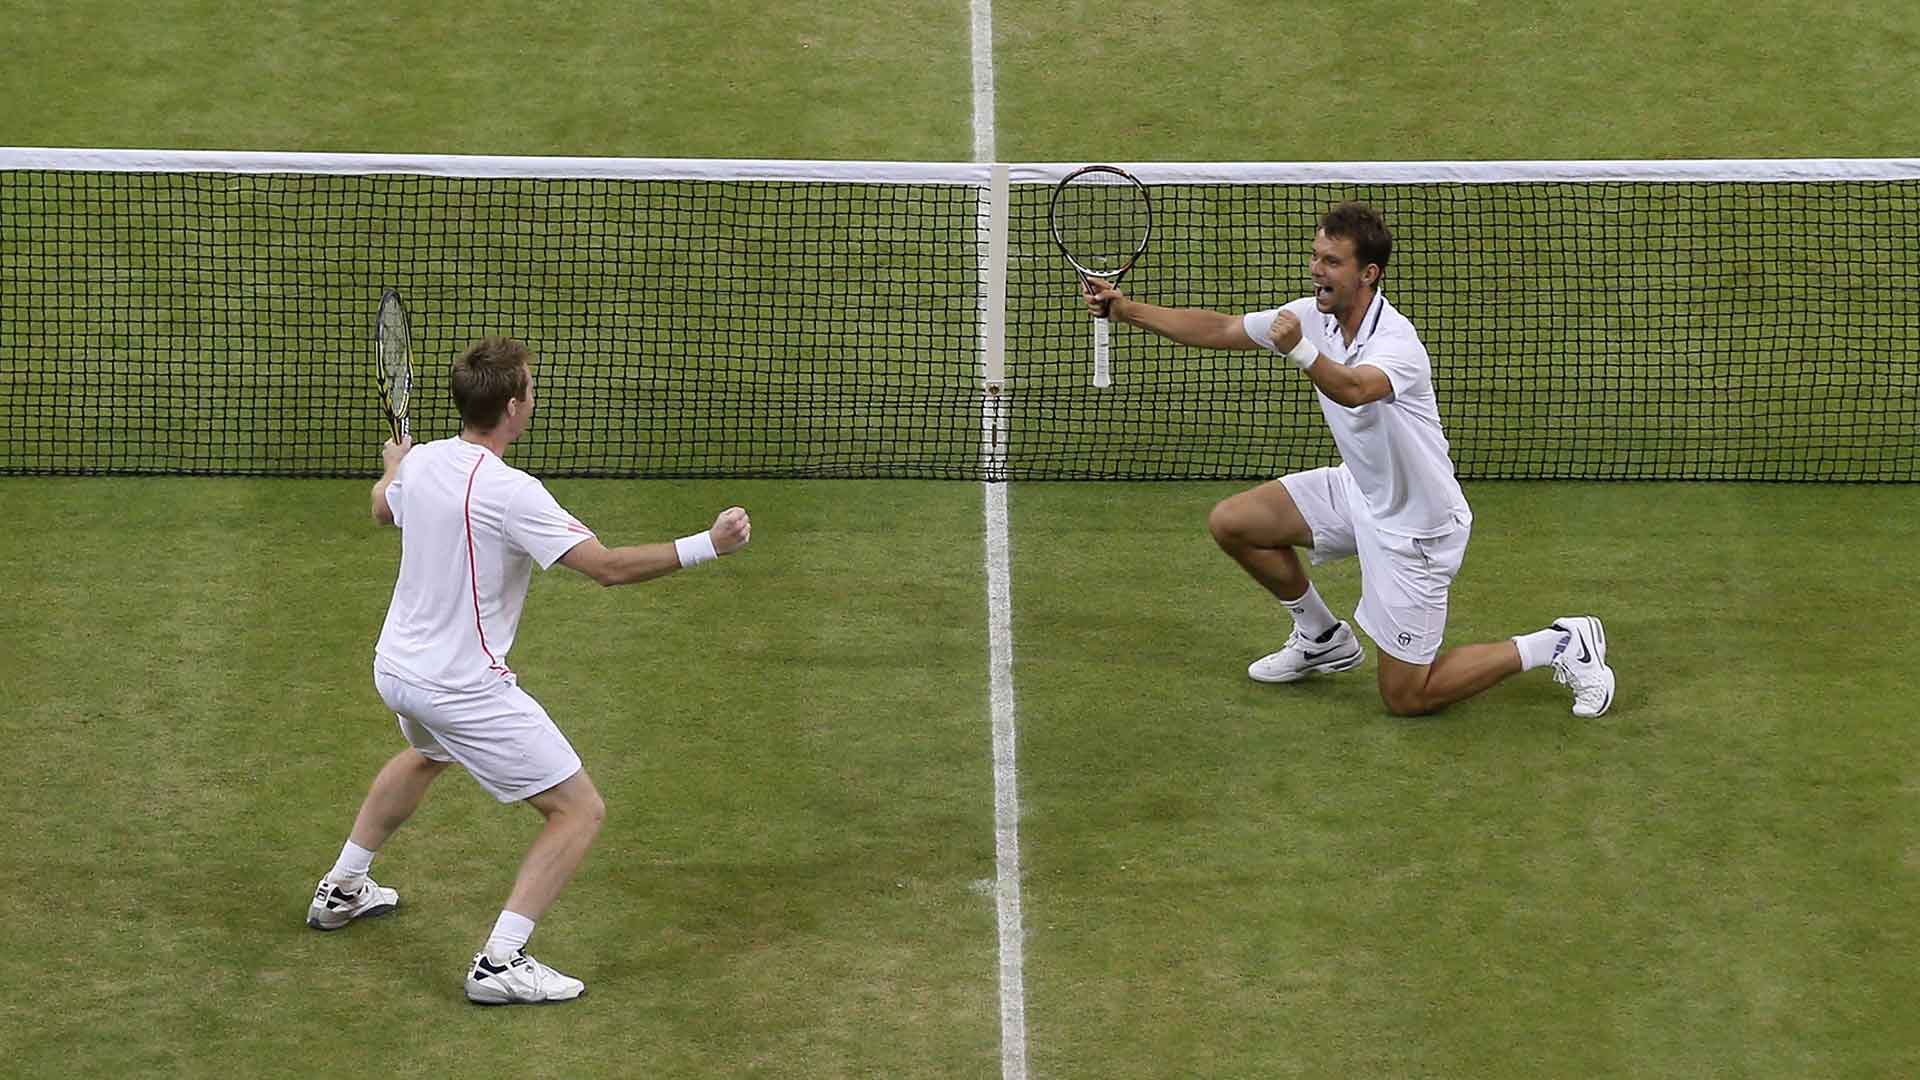 'One big ride of joy': Frederik Nielsen turns to Jonathan Marray after putting away a volley to clinch the 2012 Wimbledon title.